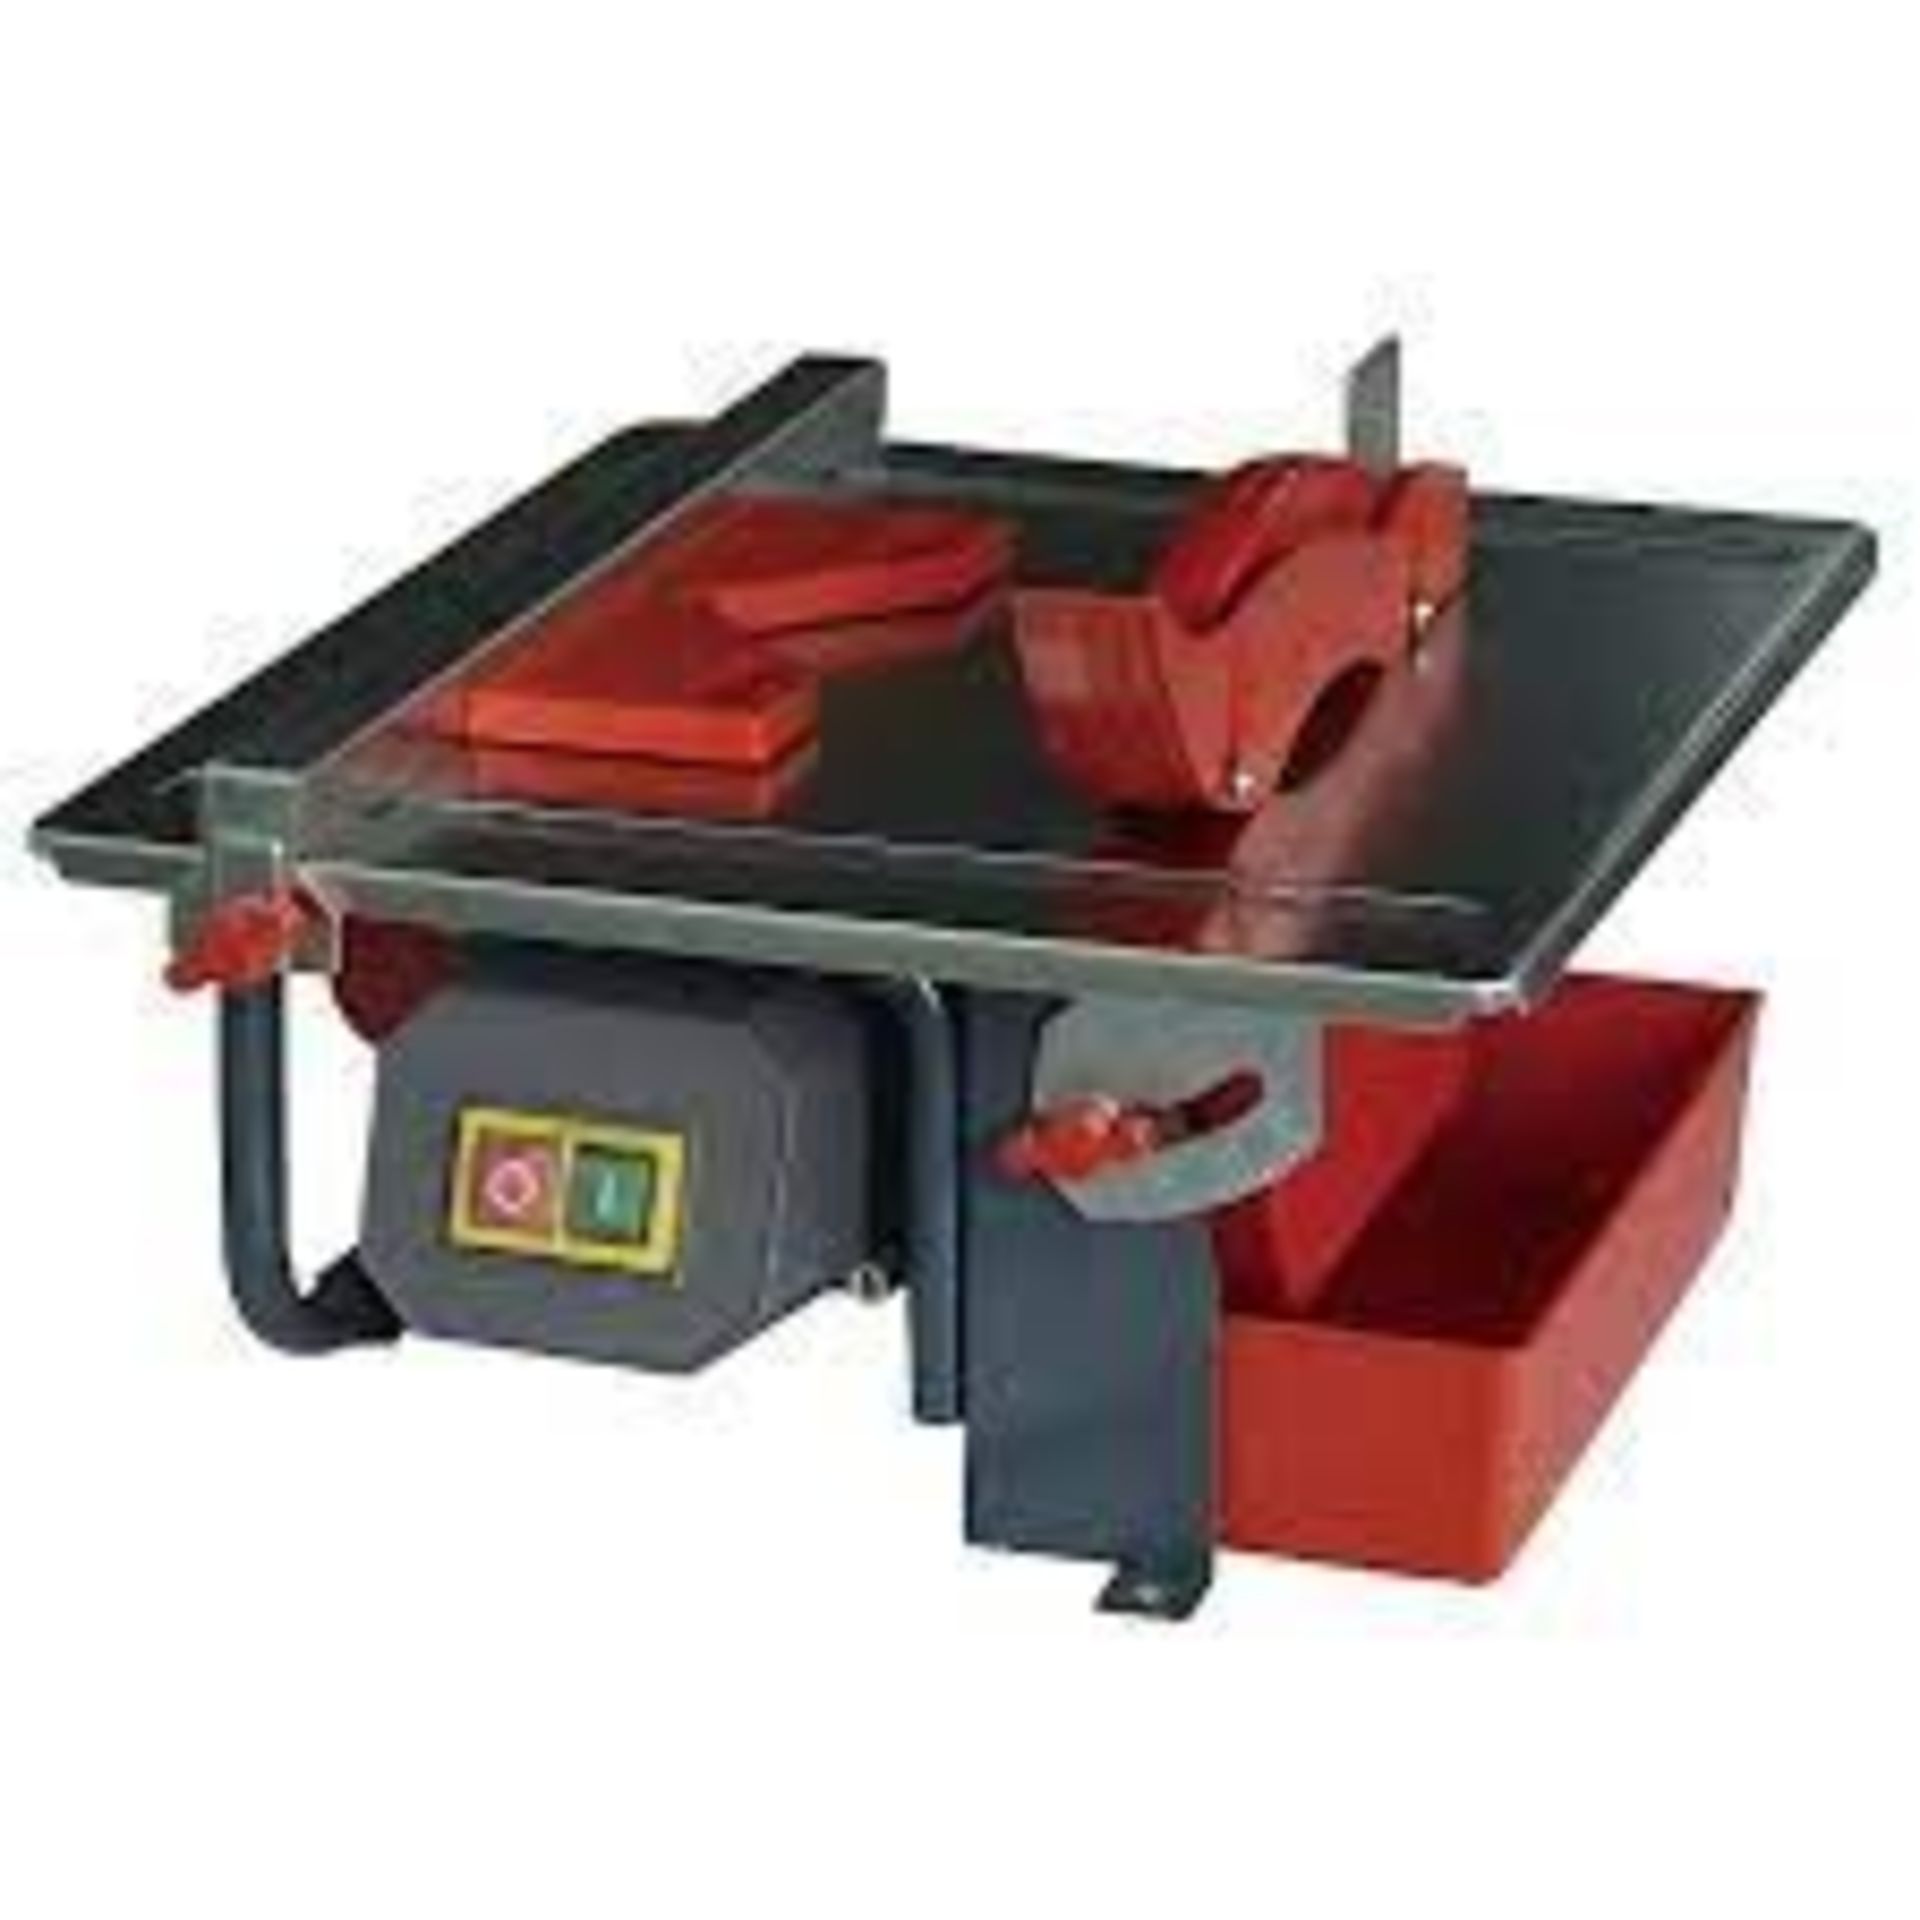 Performance Power 450W 230-240V Corded Tile cutter PTC450E. - R14.12. Suitable for cutting various